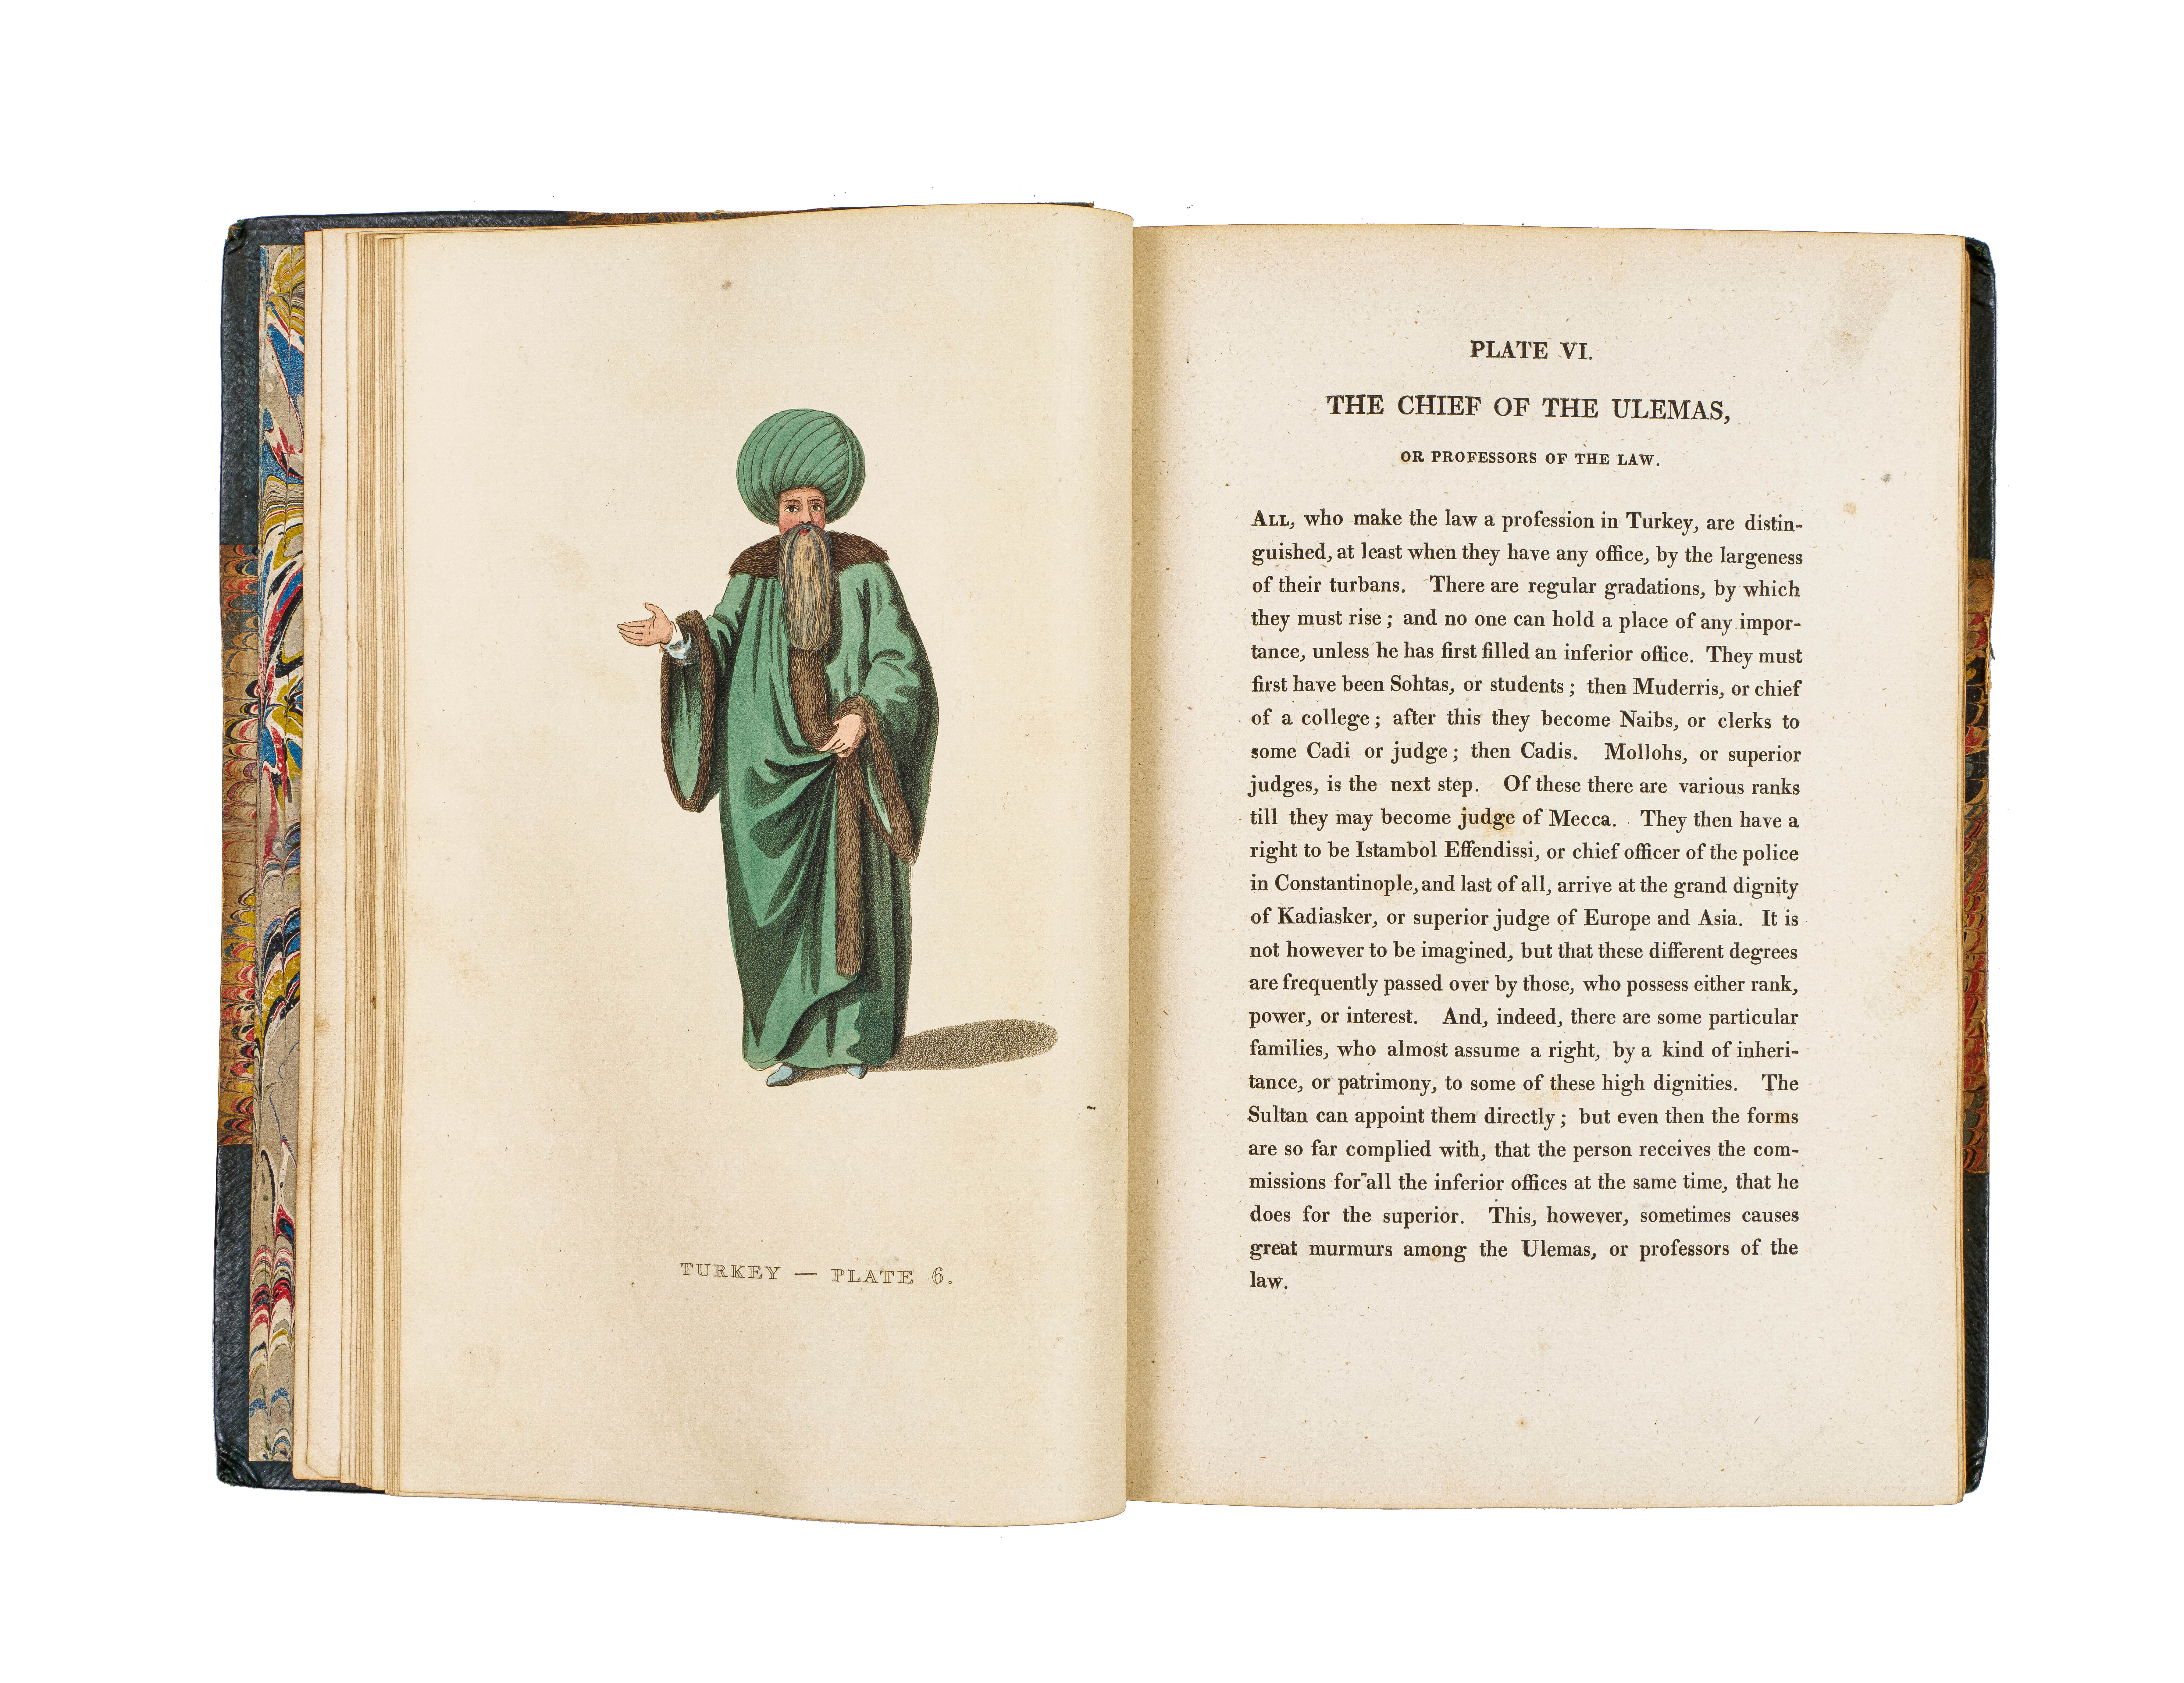 COSTUMES TURKEY, PICTURESQUE REPRESENTATIONS OF THE DRESS AND MANNERS OF THE TURKS, JOHN MURRAY, LON - Image 5 of 8